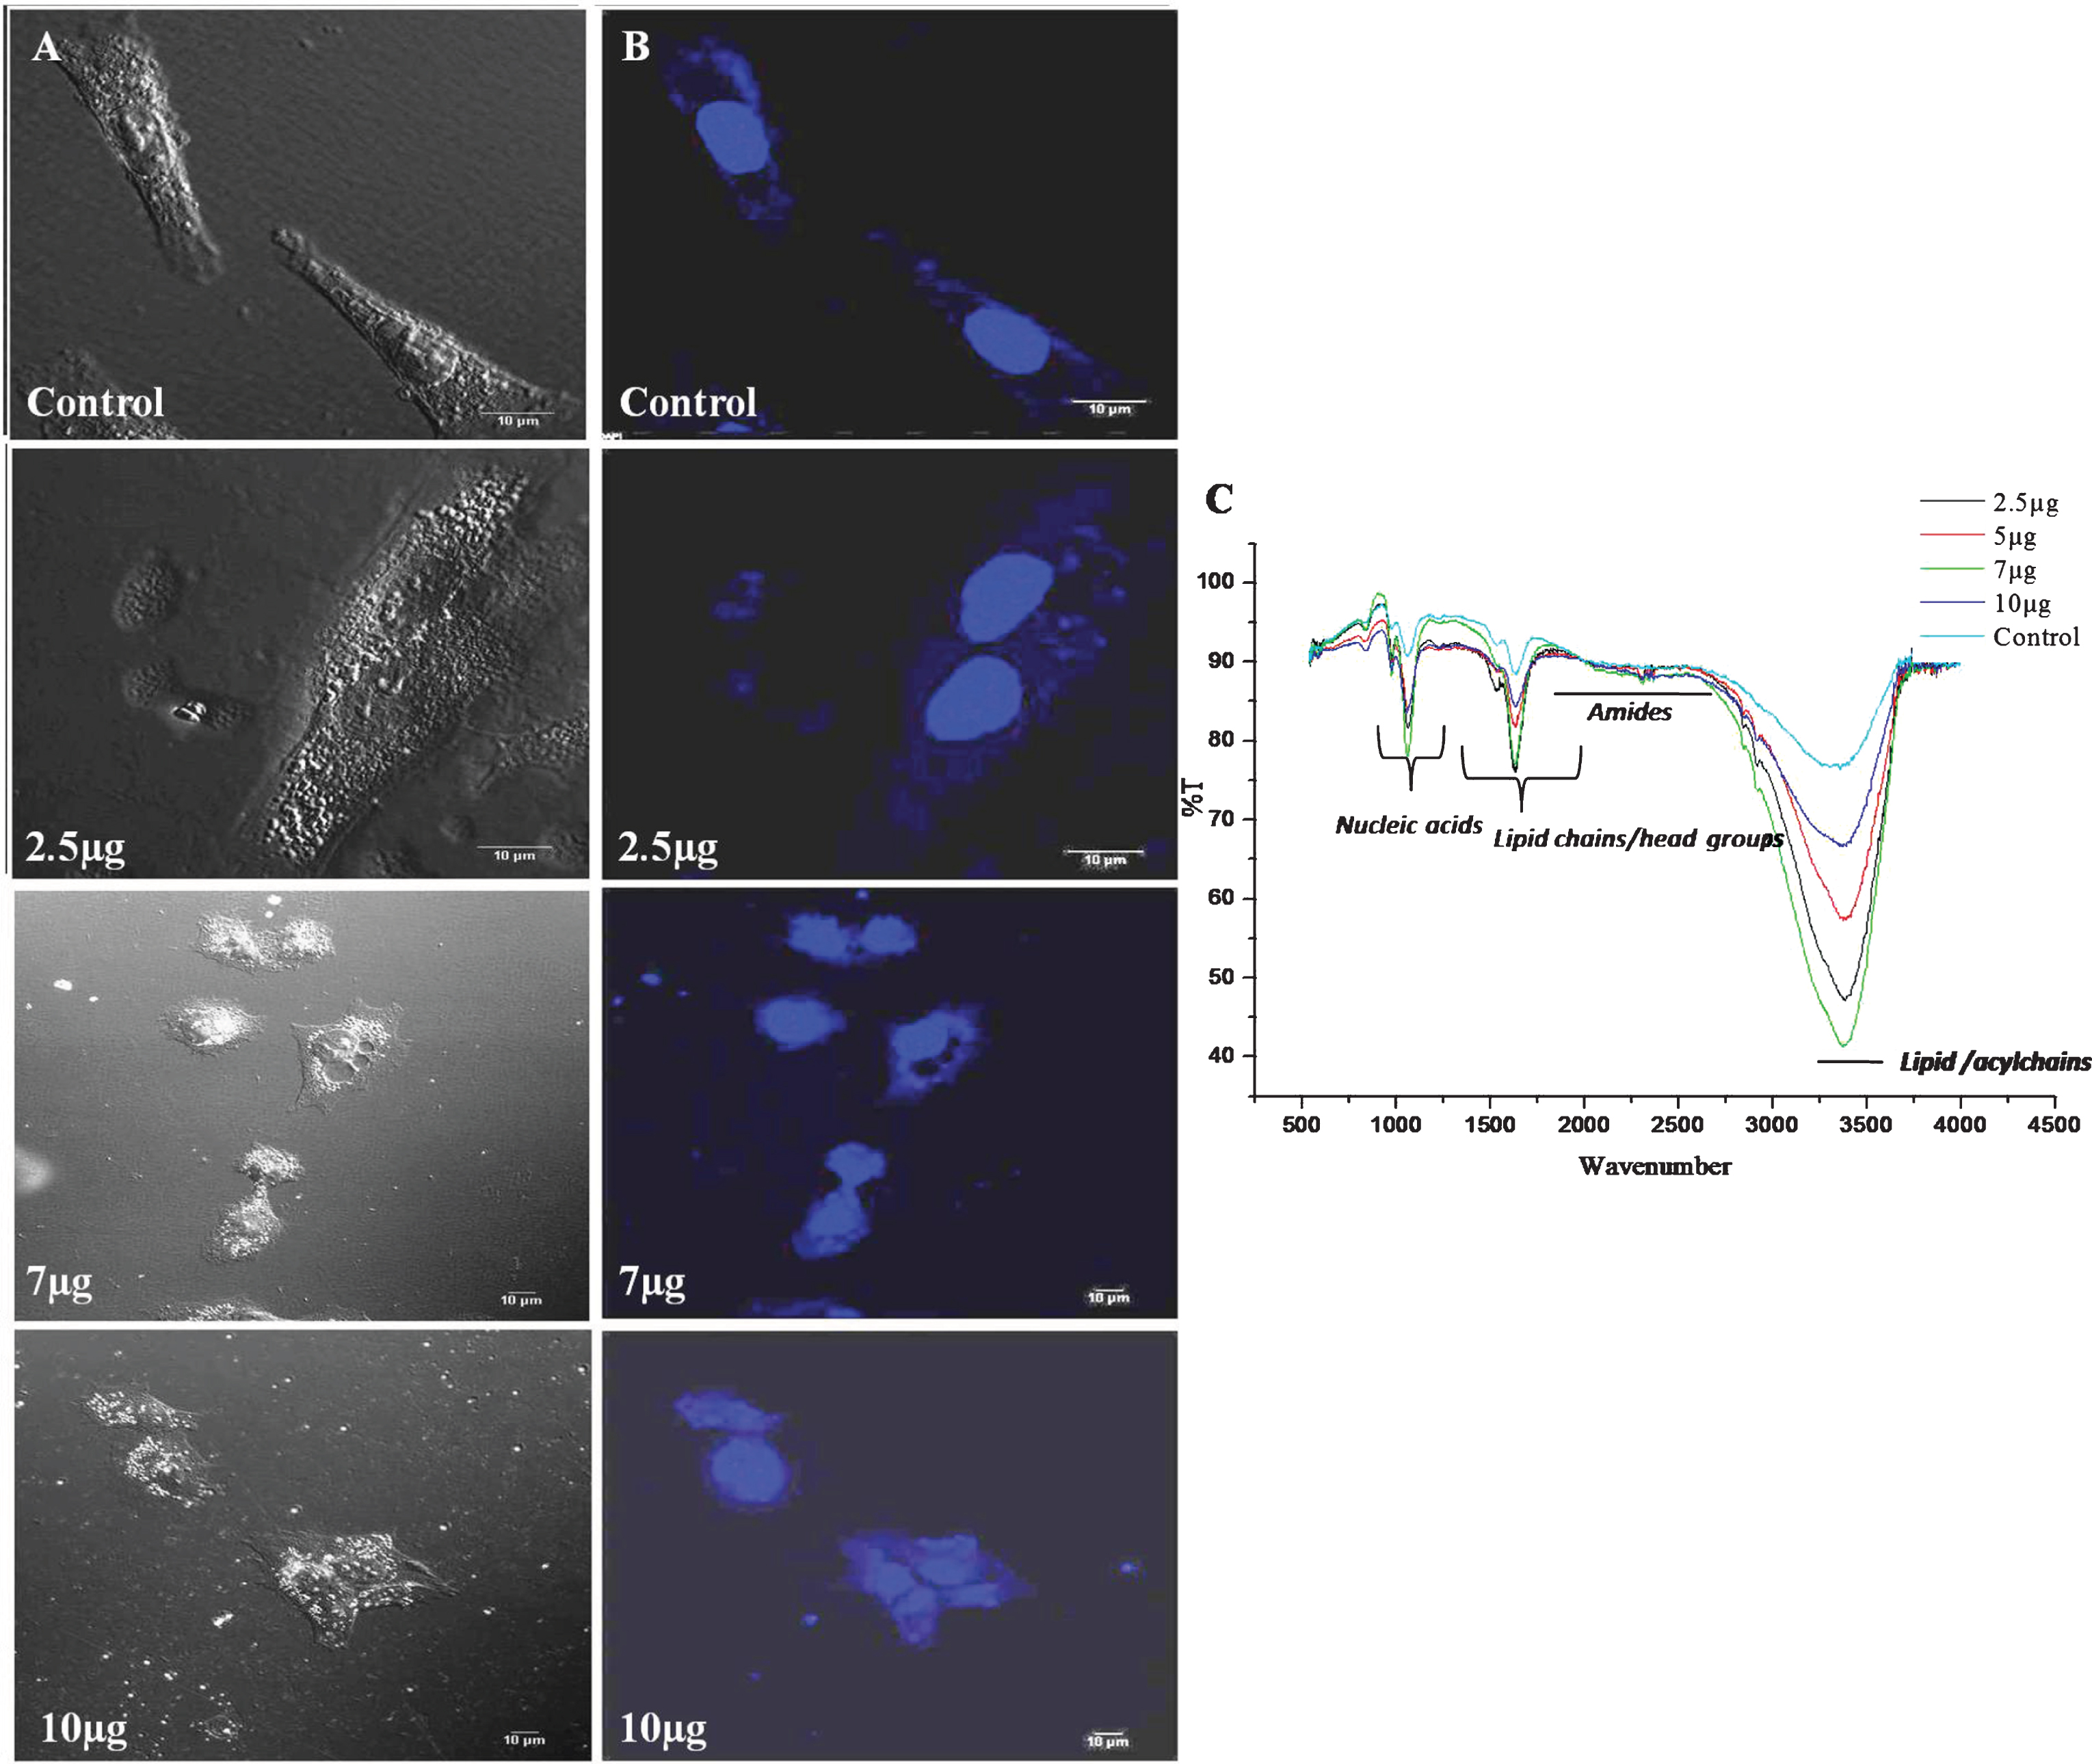 Confocal microscopy and FTIR analysis of control and CKf treated DU-145 cells. A: Normal confocal image B: Confocal image of DAPI stained cells. C: FTIR analysis of control and CKf treated DU-145 cells. All the experiments were done in triplicate.